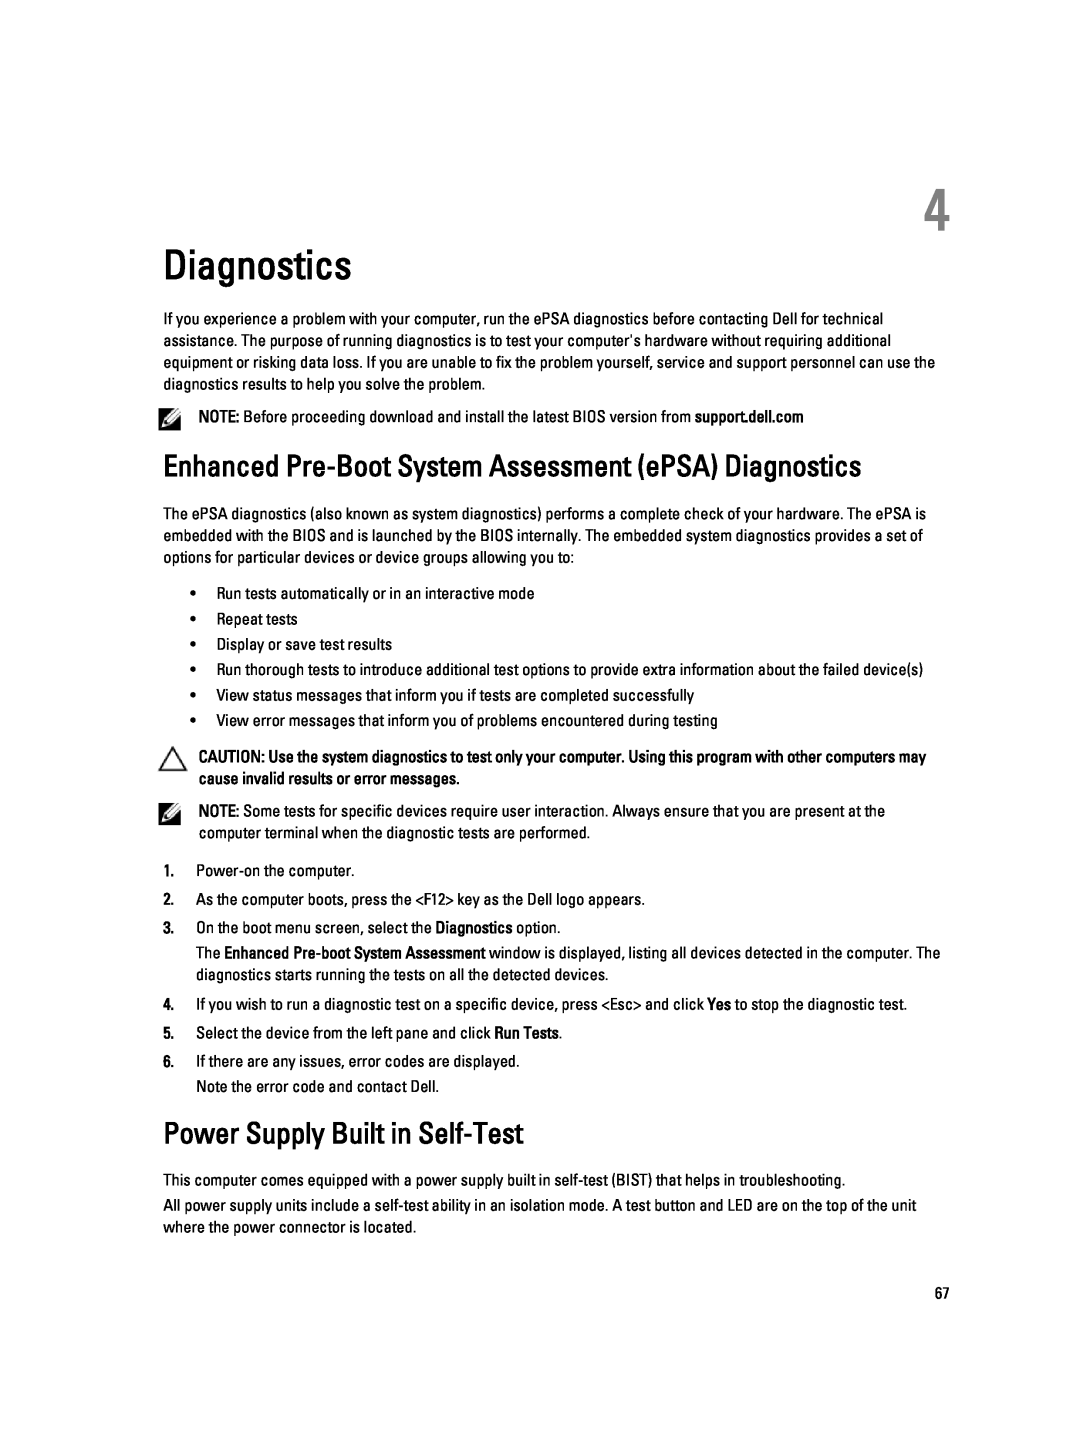 Dell 9010, W04C owner manual Enhanced Pre-Boot System Assessment ePSA Diagnostics, Power Supply Built in Self-Test 